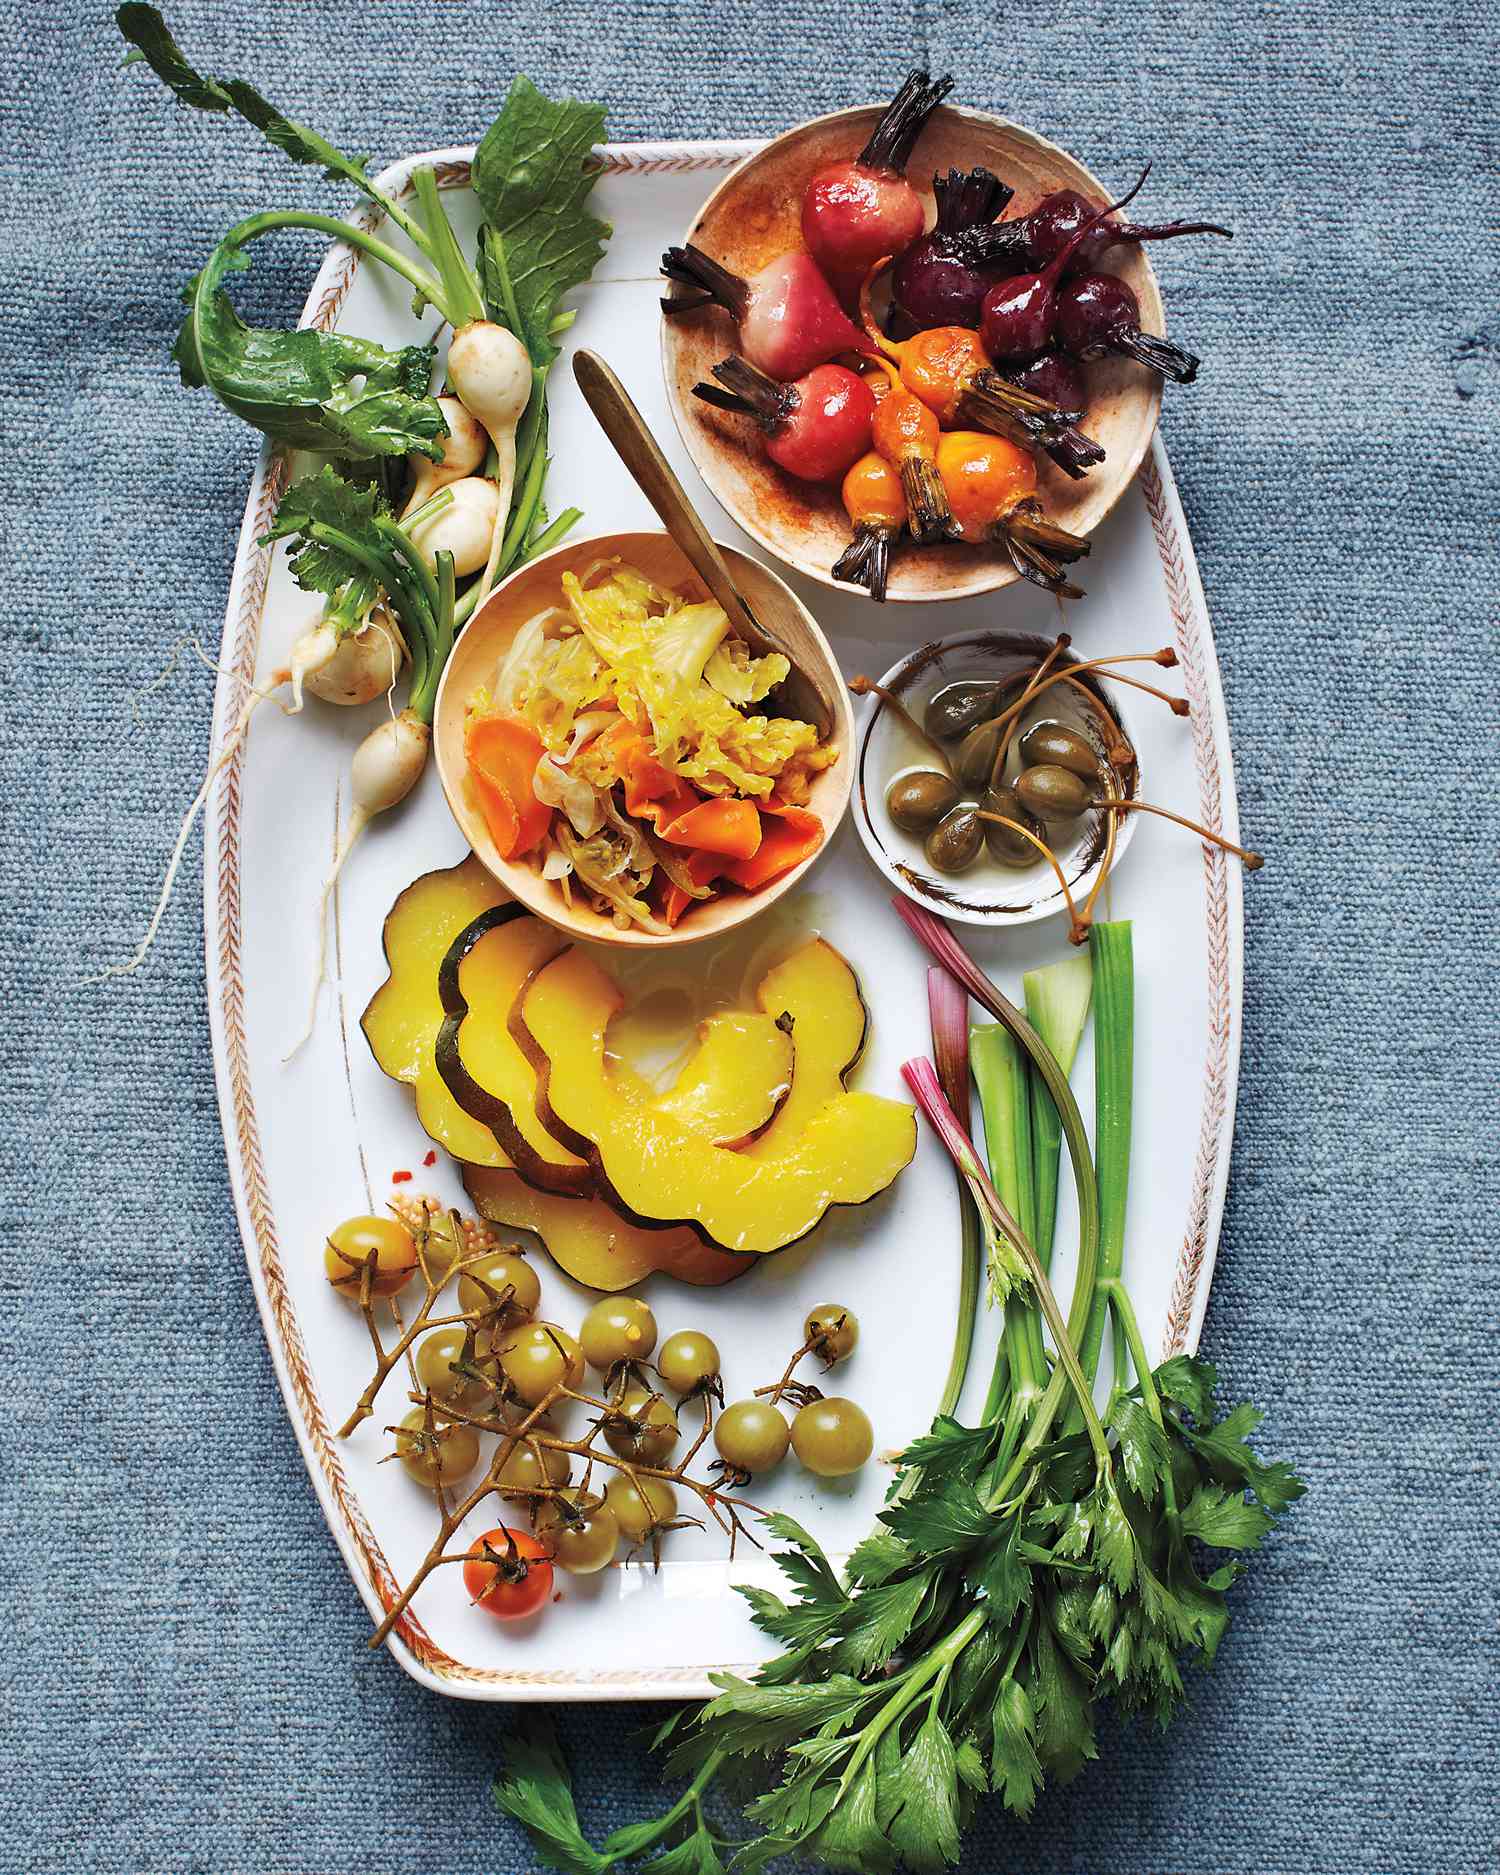 Pickle-Dressed Acorn Squash and Beets